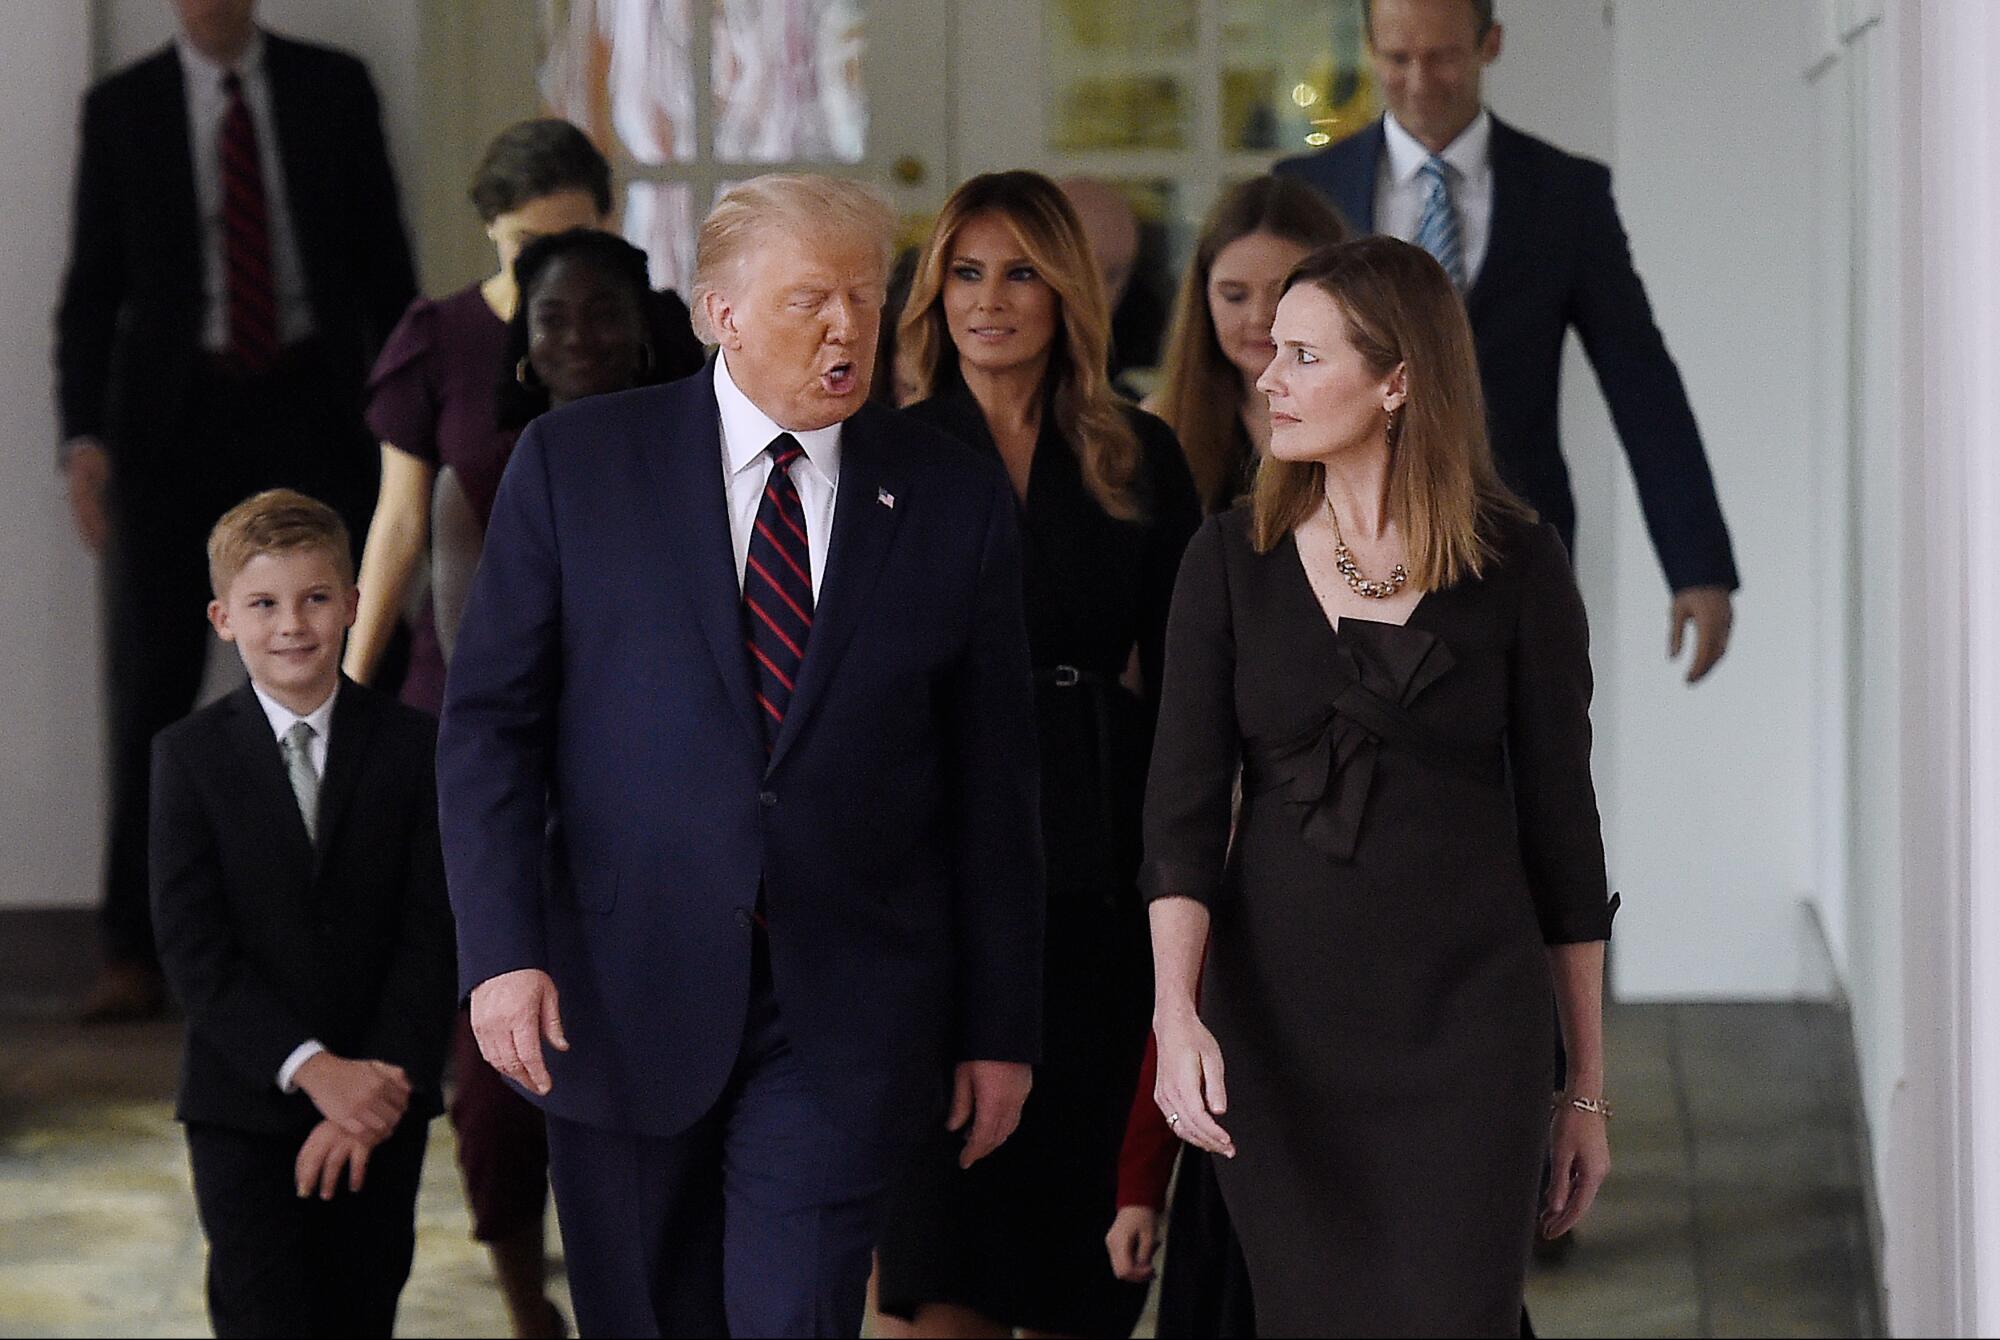 President Trump and Judge Amy Coney Barrett before he introduced her as his Supreme Court pick